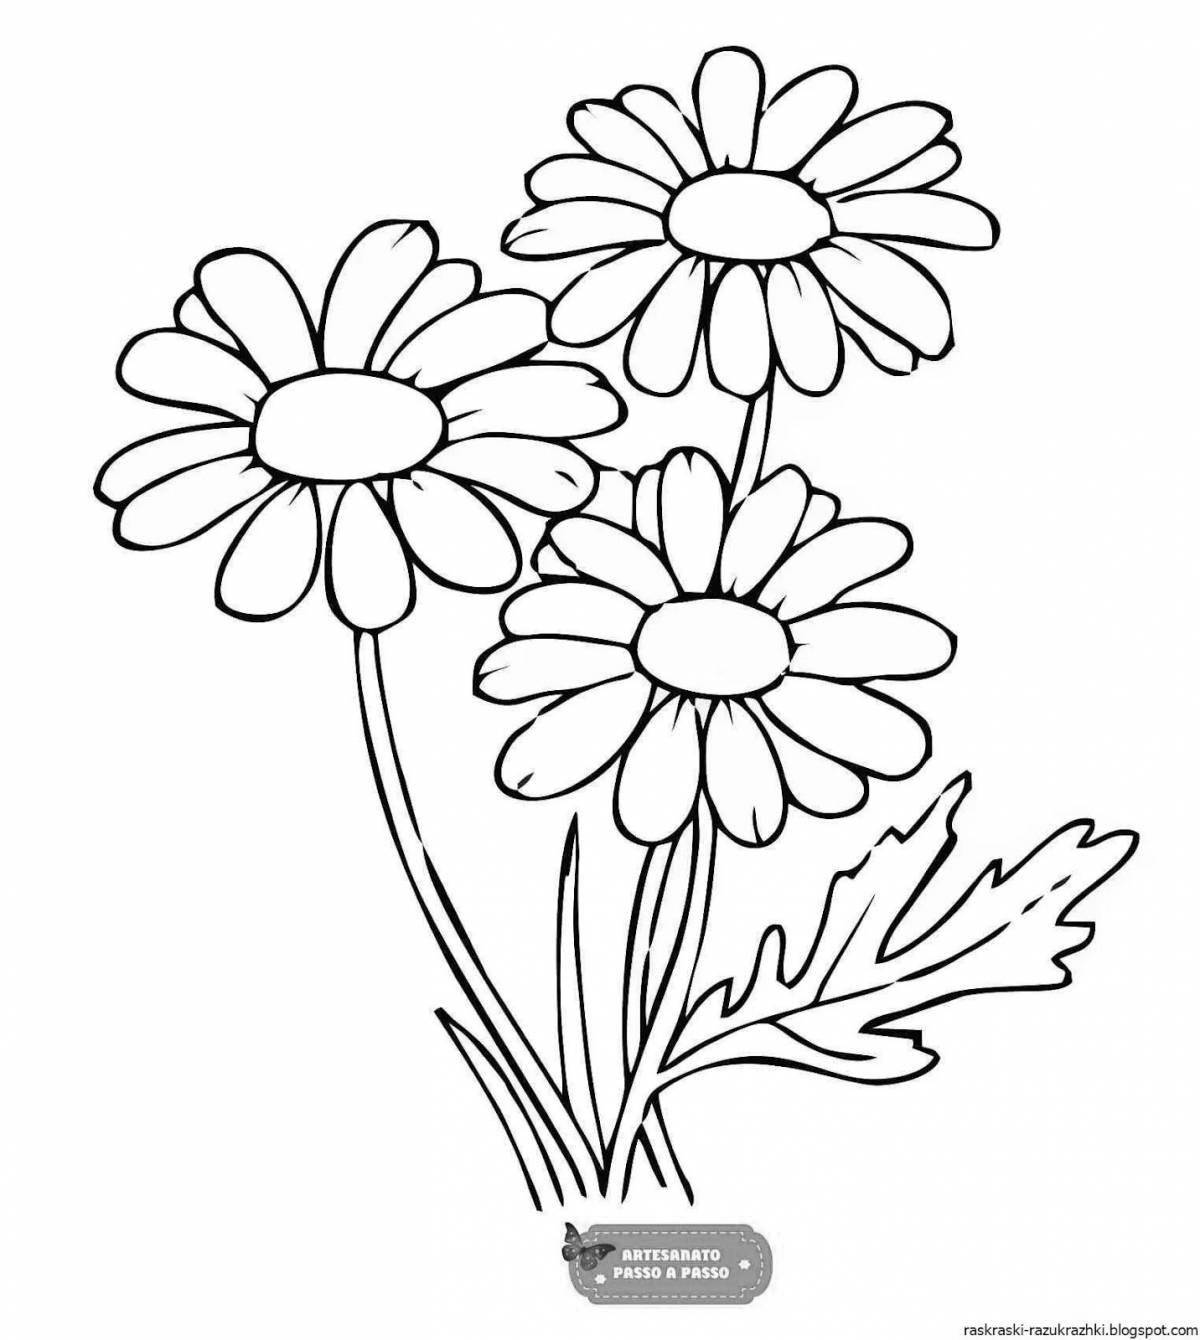 Exciting daisy coloring book for 3-4 year olds